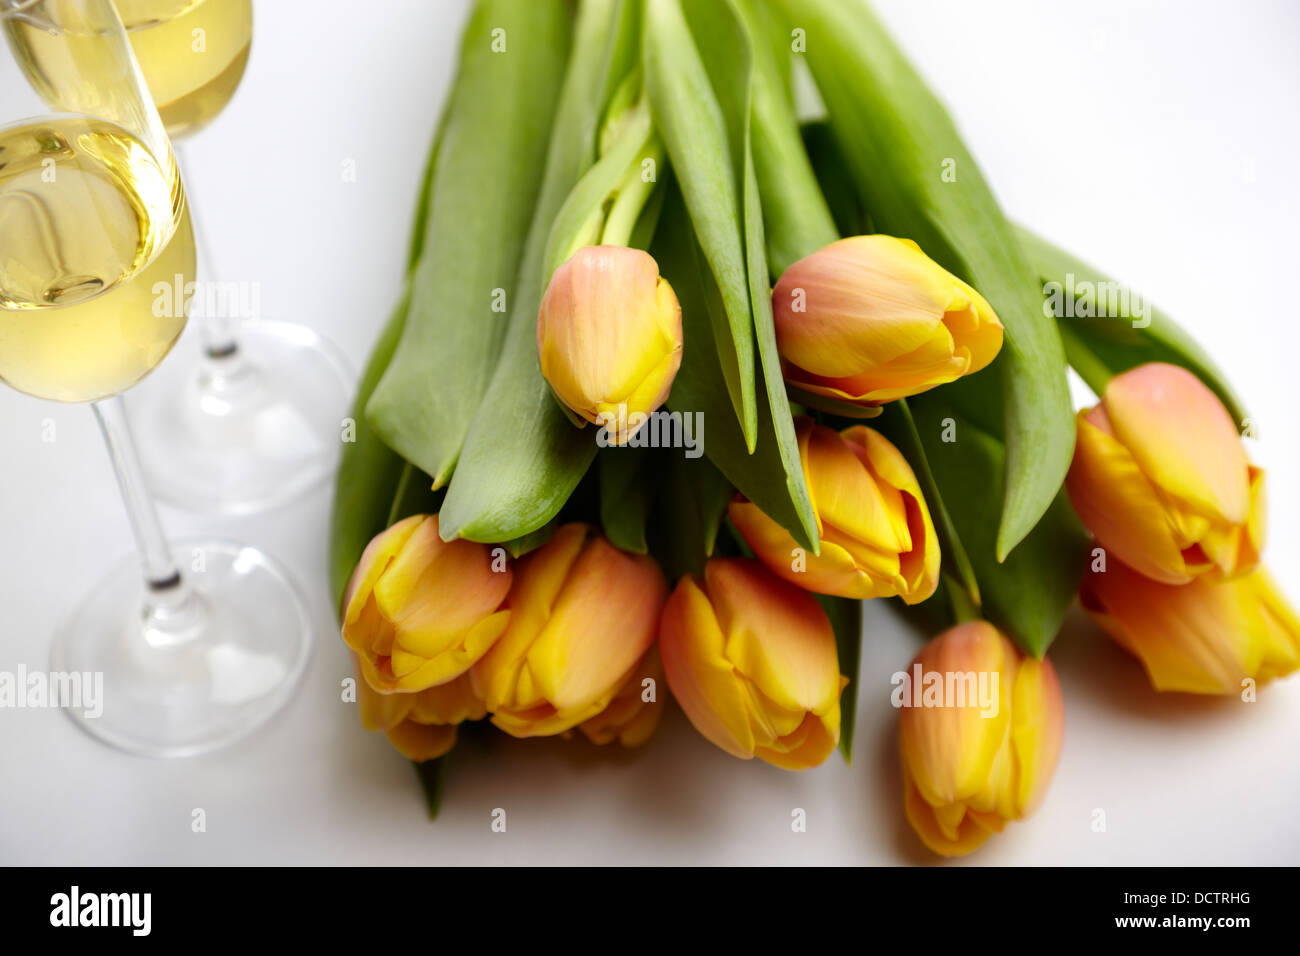 3+ Thousand Champagne Tulip Royalty-Free Images, Stock Photos & Pictures